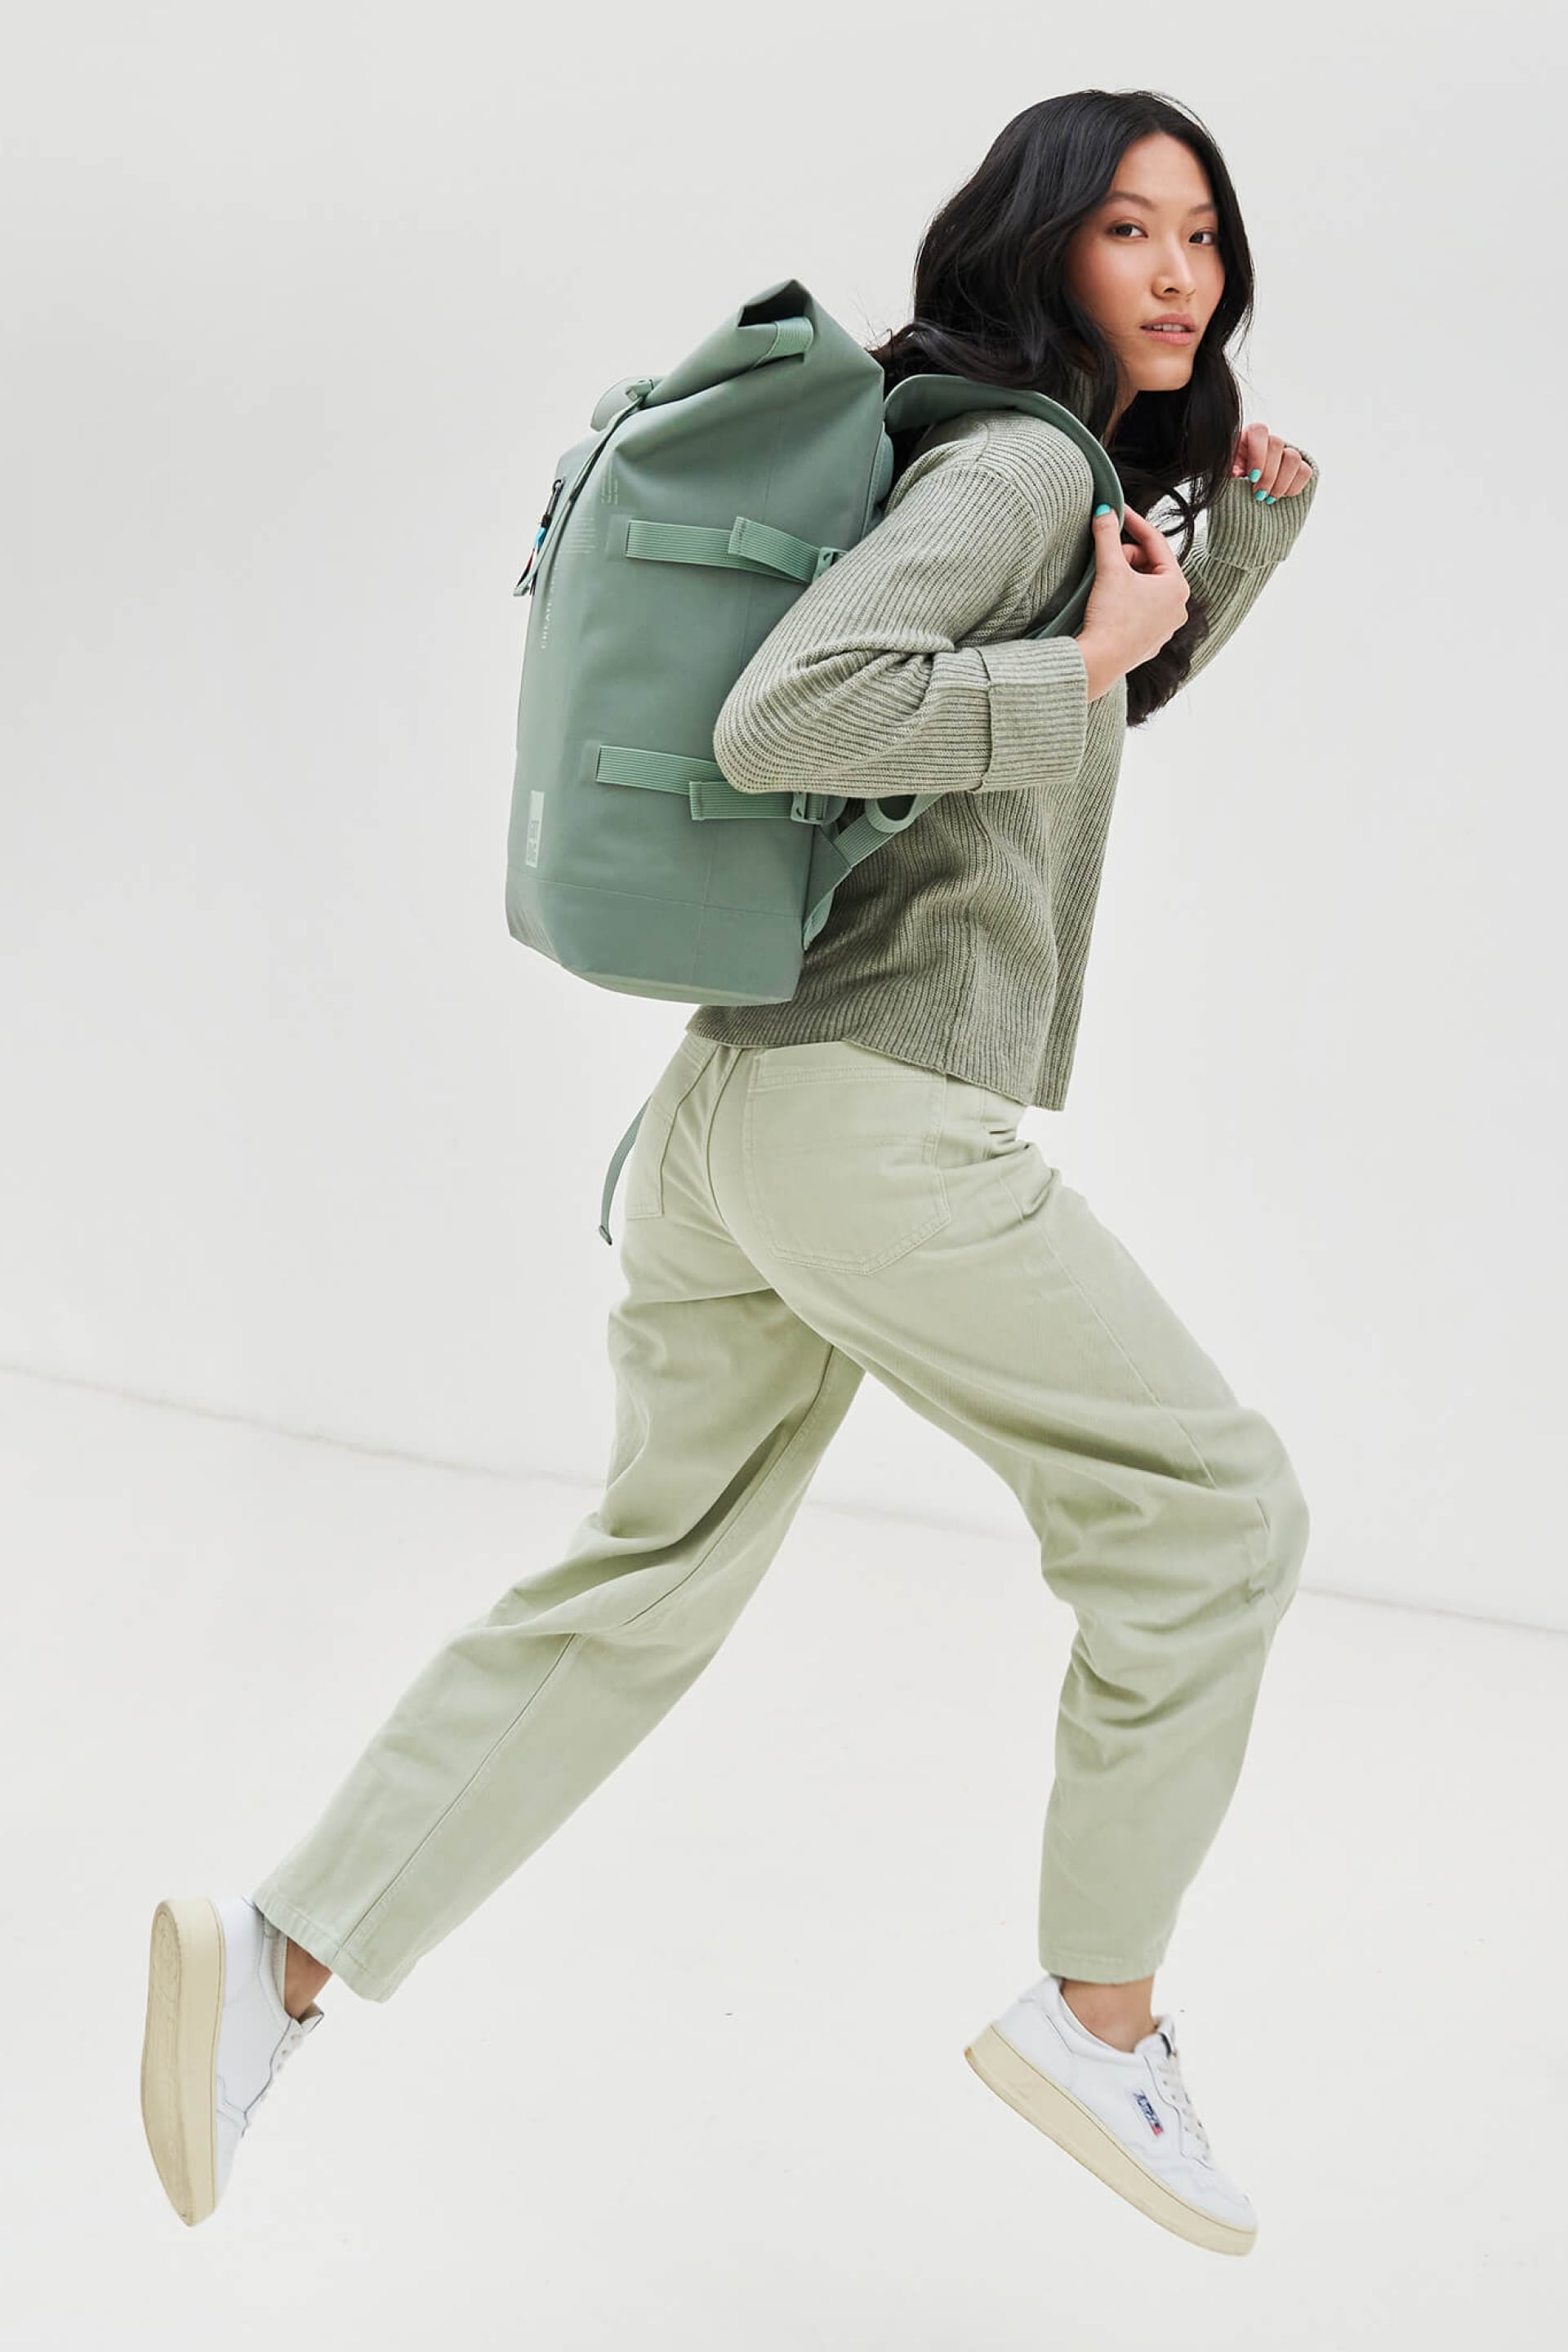 Deluxe Backpack Made From Recycled Plastic Bags